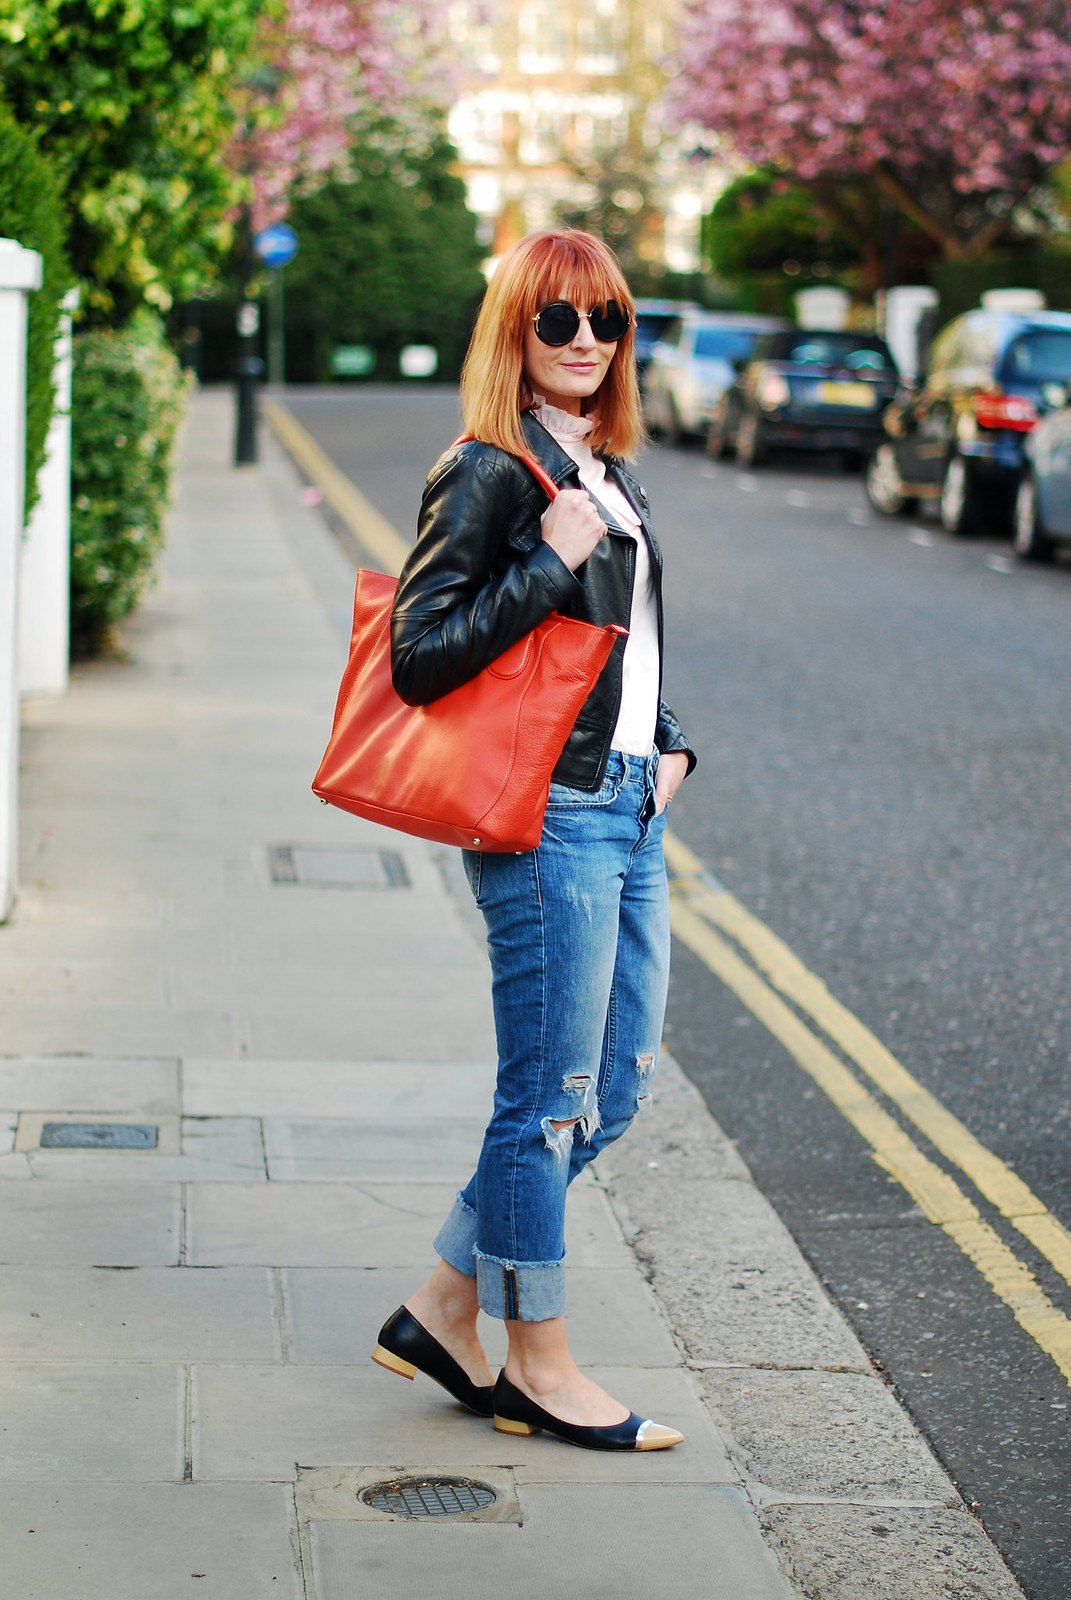 SS16 Style: M&S Archive by Alexa ruffled Harry blouse, distressed boyfriend jeans, black biker jacket, orange tote, pointed two-tone flats | Not Dressed As Lamb